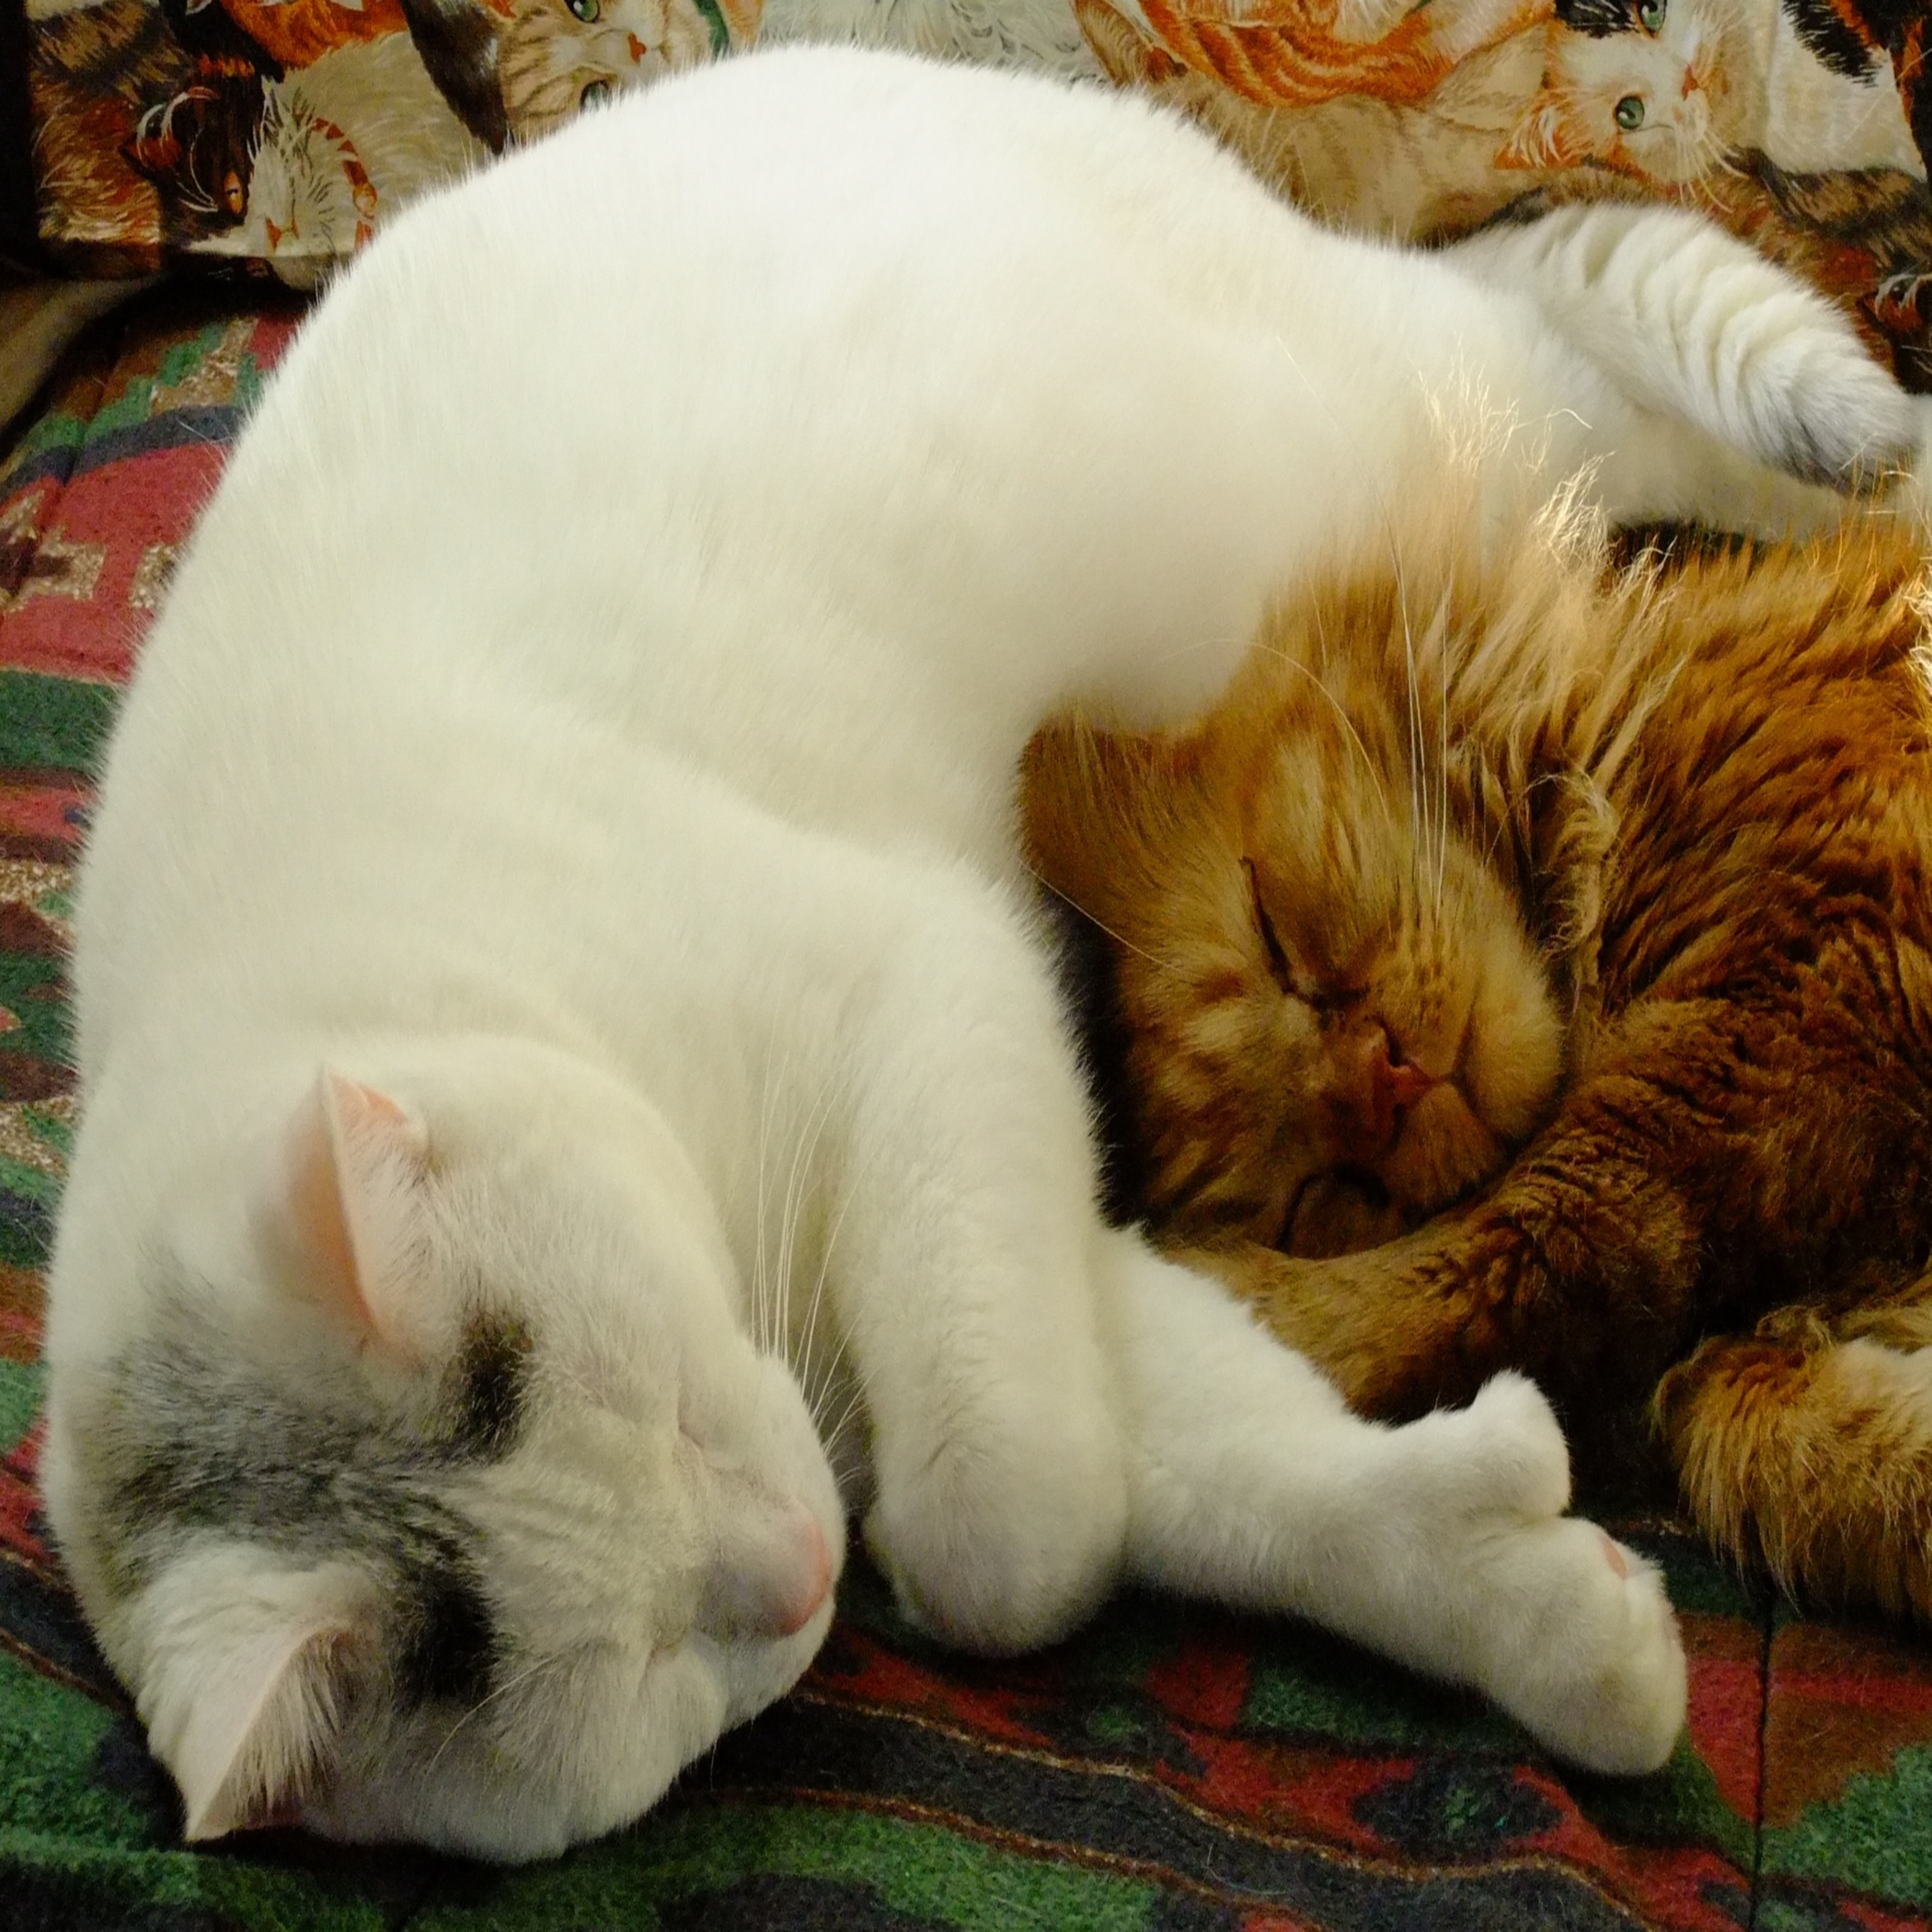 Cuddling Kitties (user submitted)